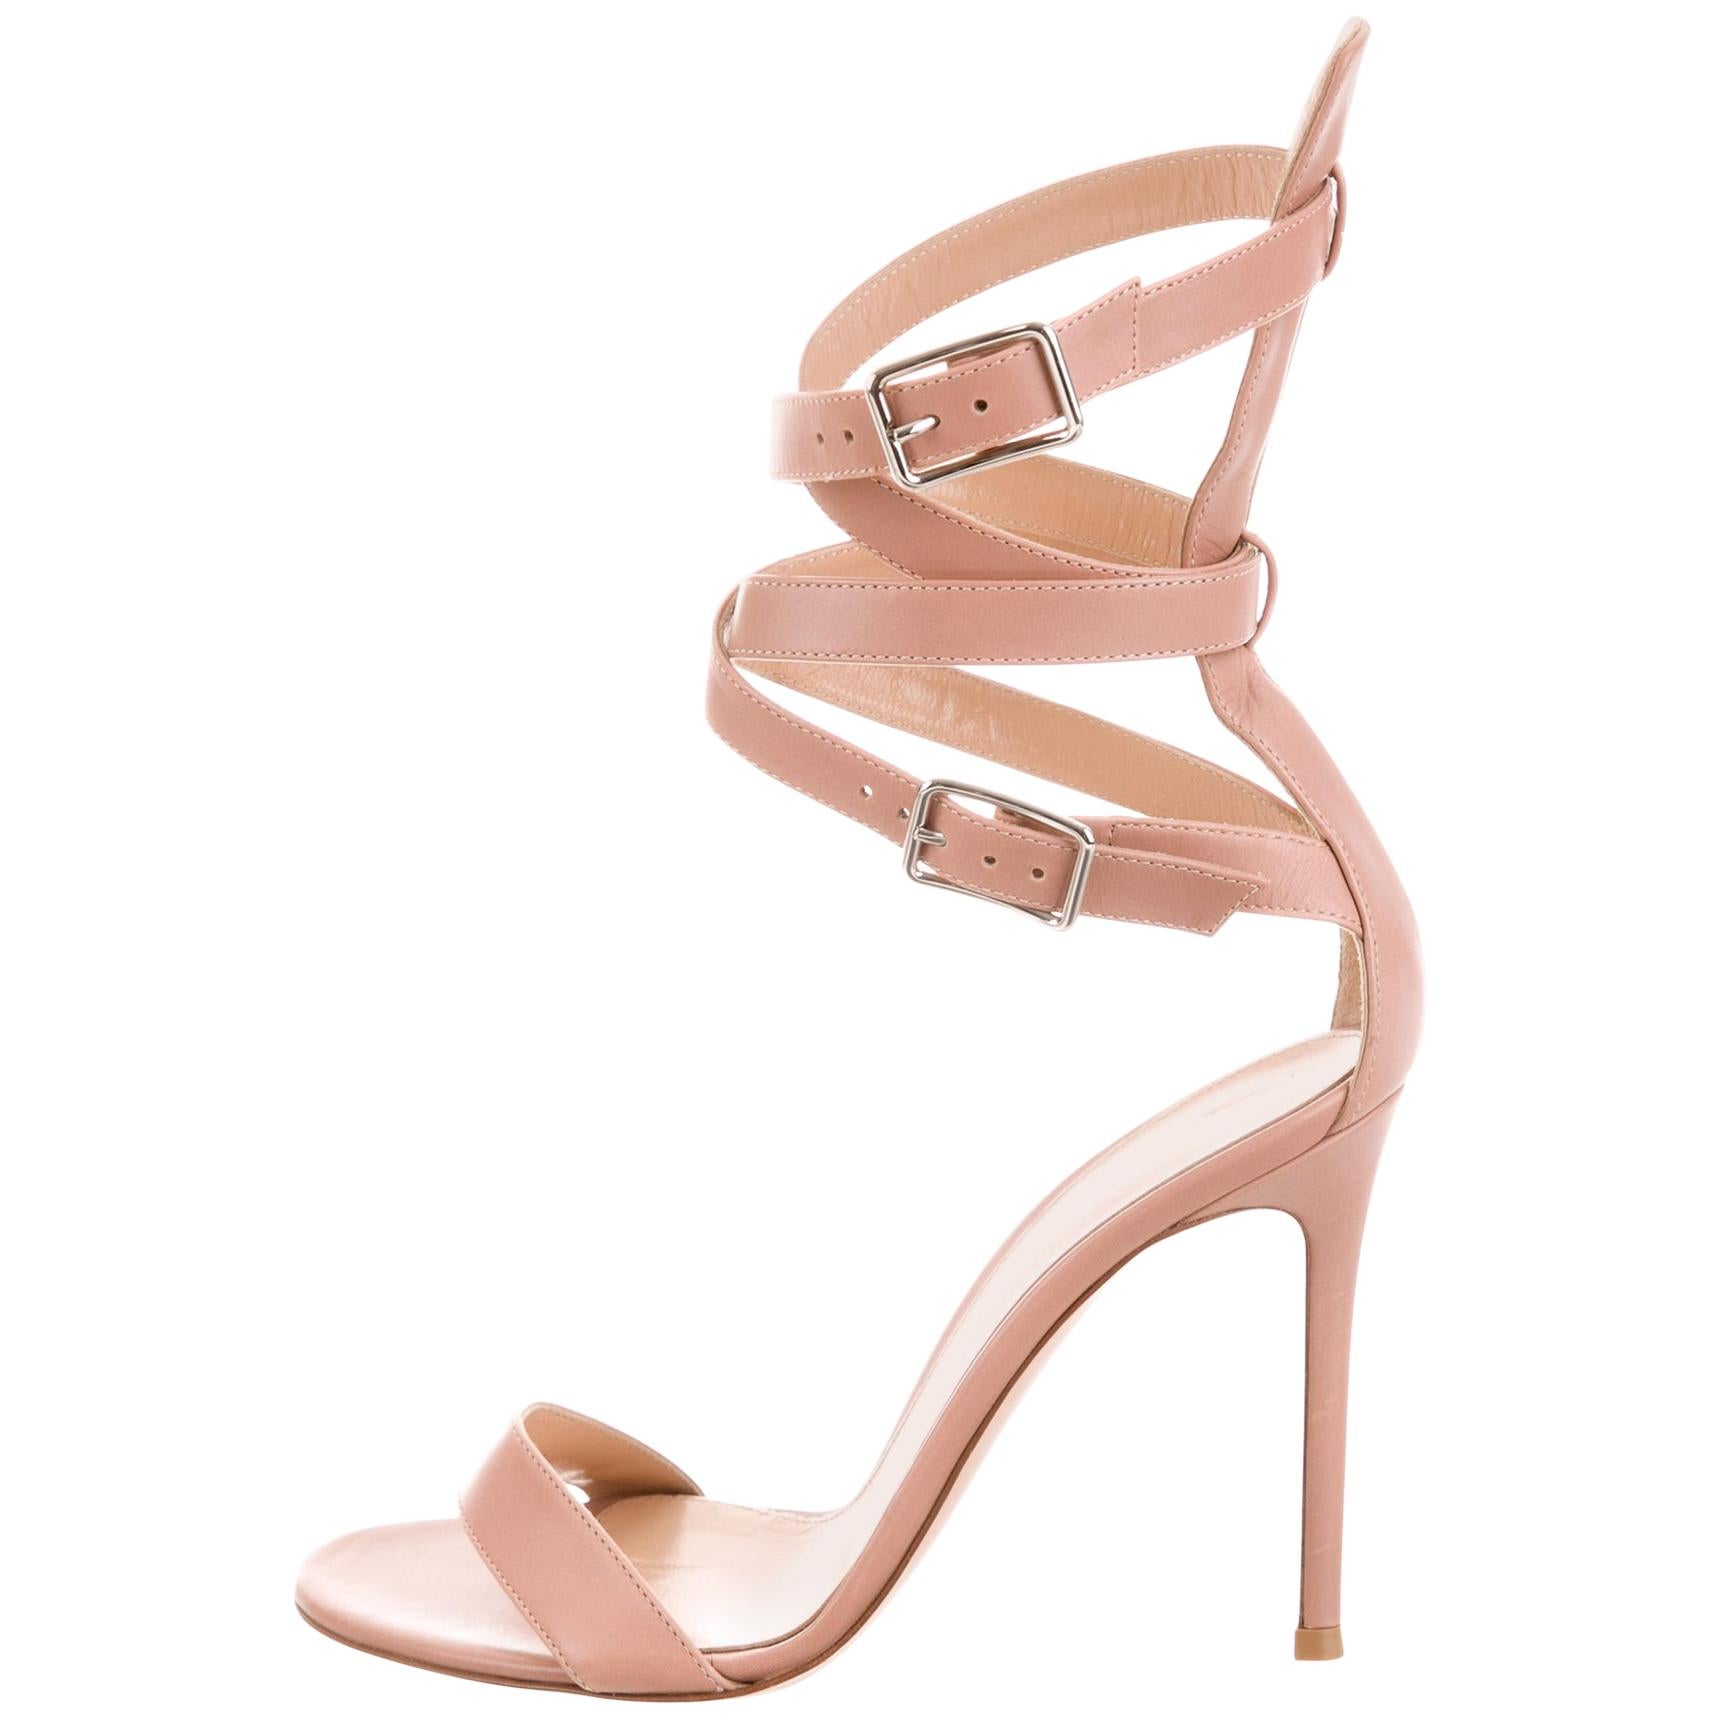 GIANVITO ROSSI NEW Nude Blush Leather Gladiator Strappy Sandals Heels in Box